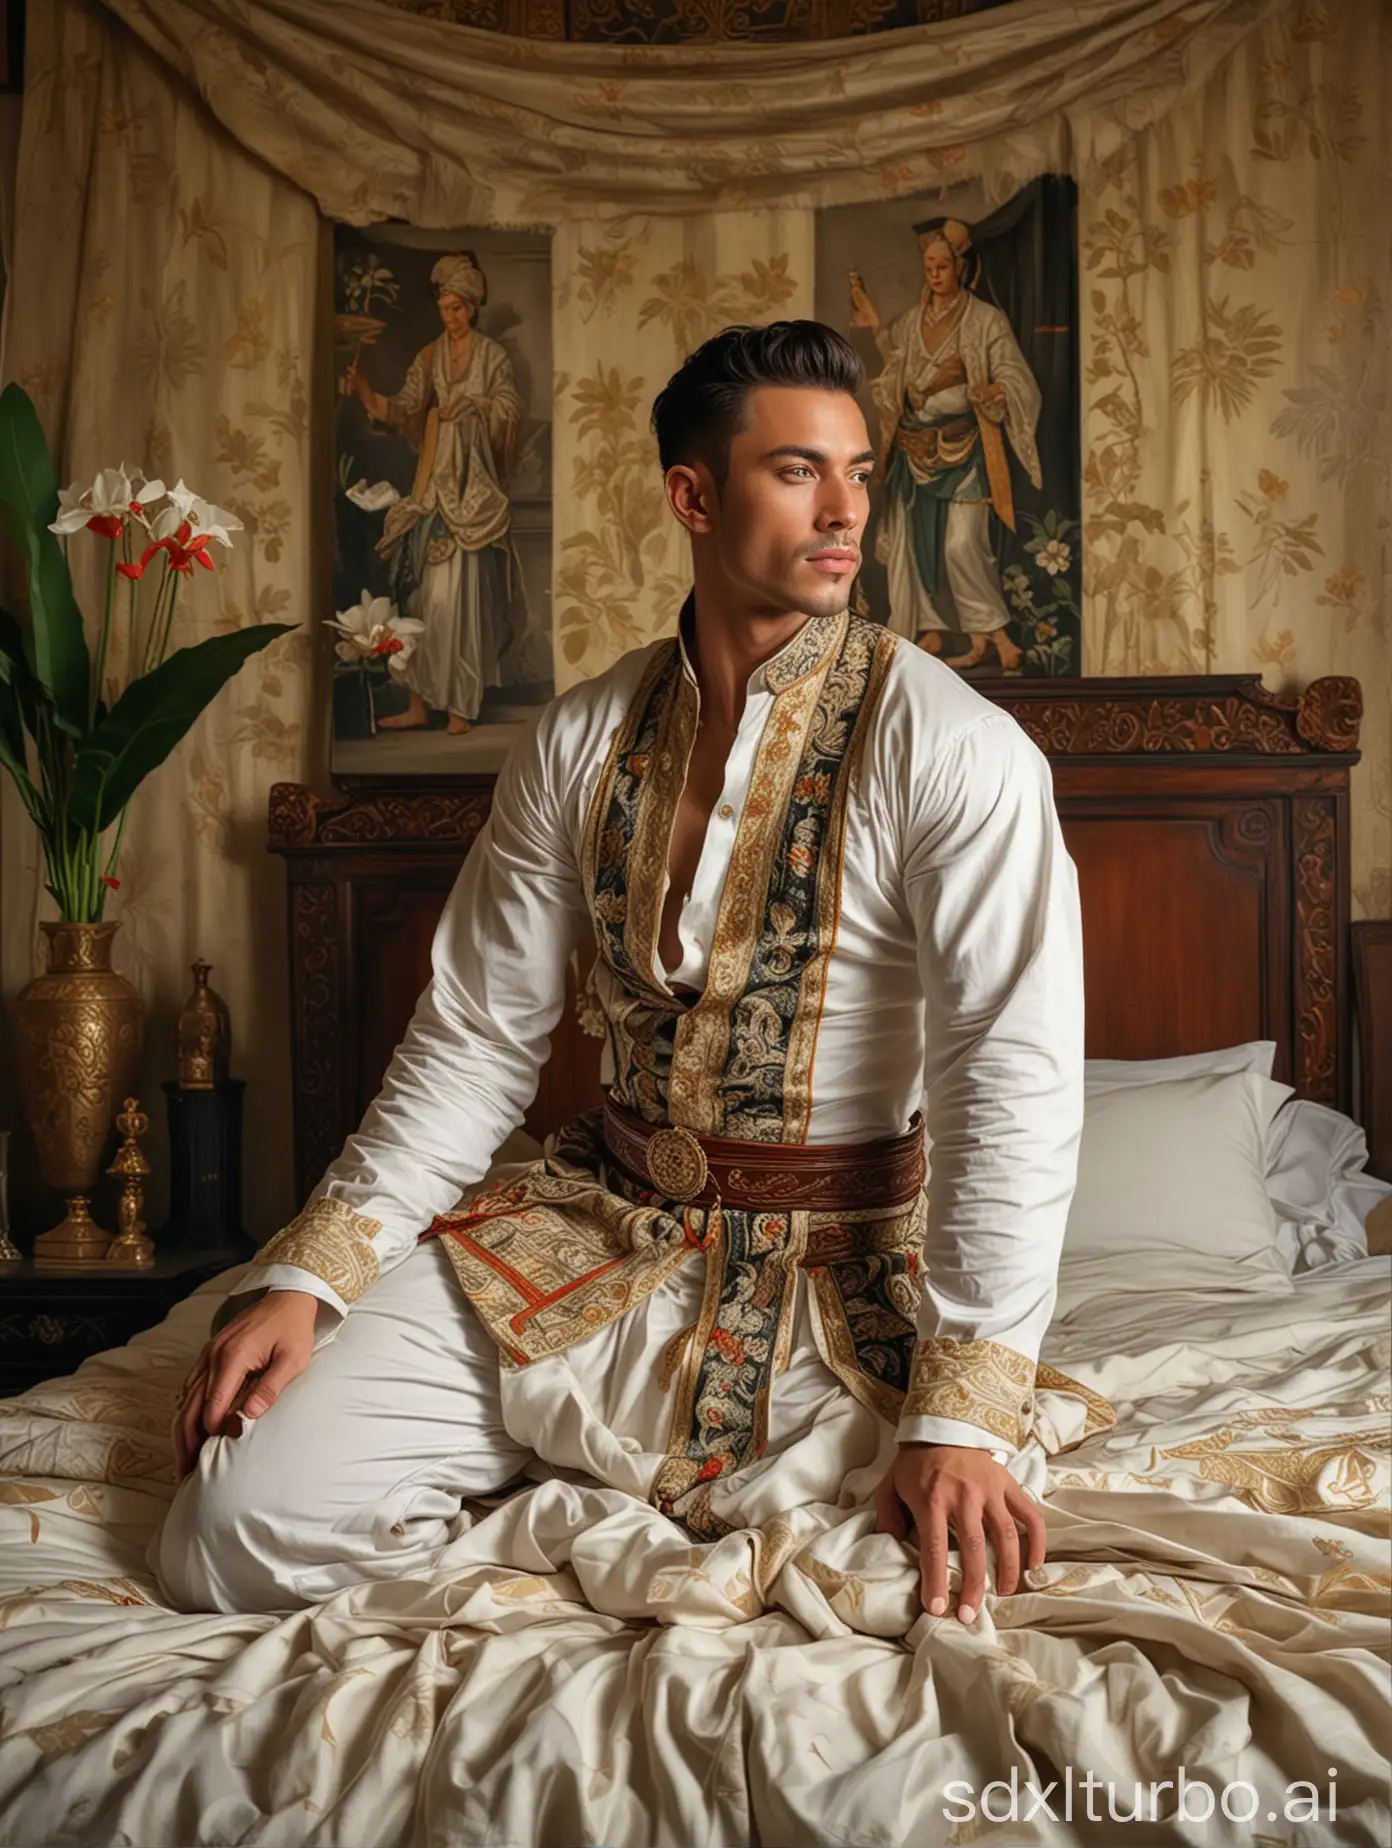 A portrait of a handsome lustfully Manadonese muscular royalty, posing ob the bed, in a torn "beskap" traditional attire, with a background of a Javanese bedroom, in the style of a painting by Leyendecker.